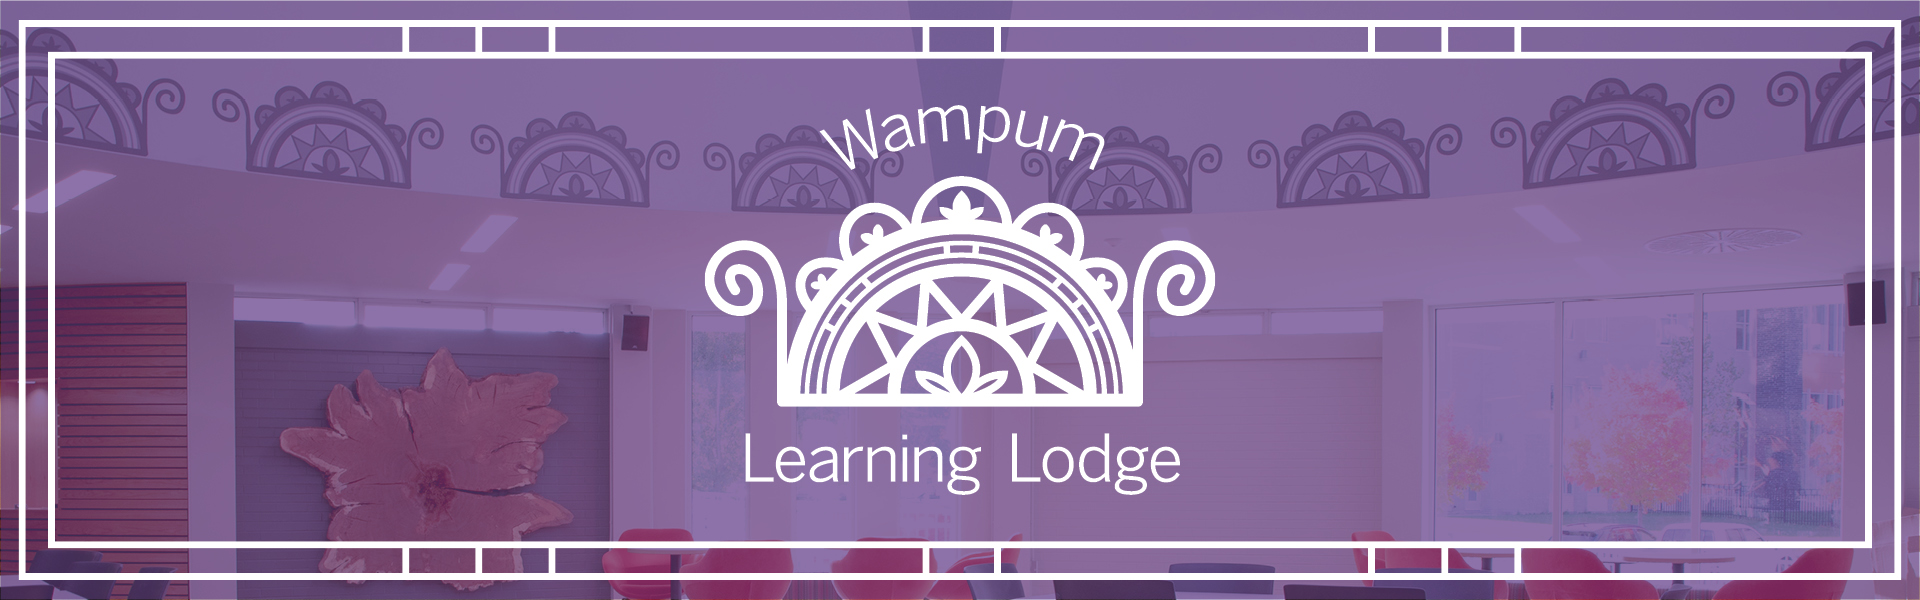 Wampum Learning Lodge, now open